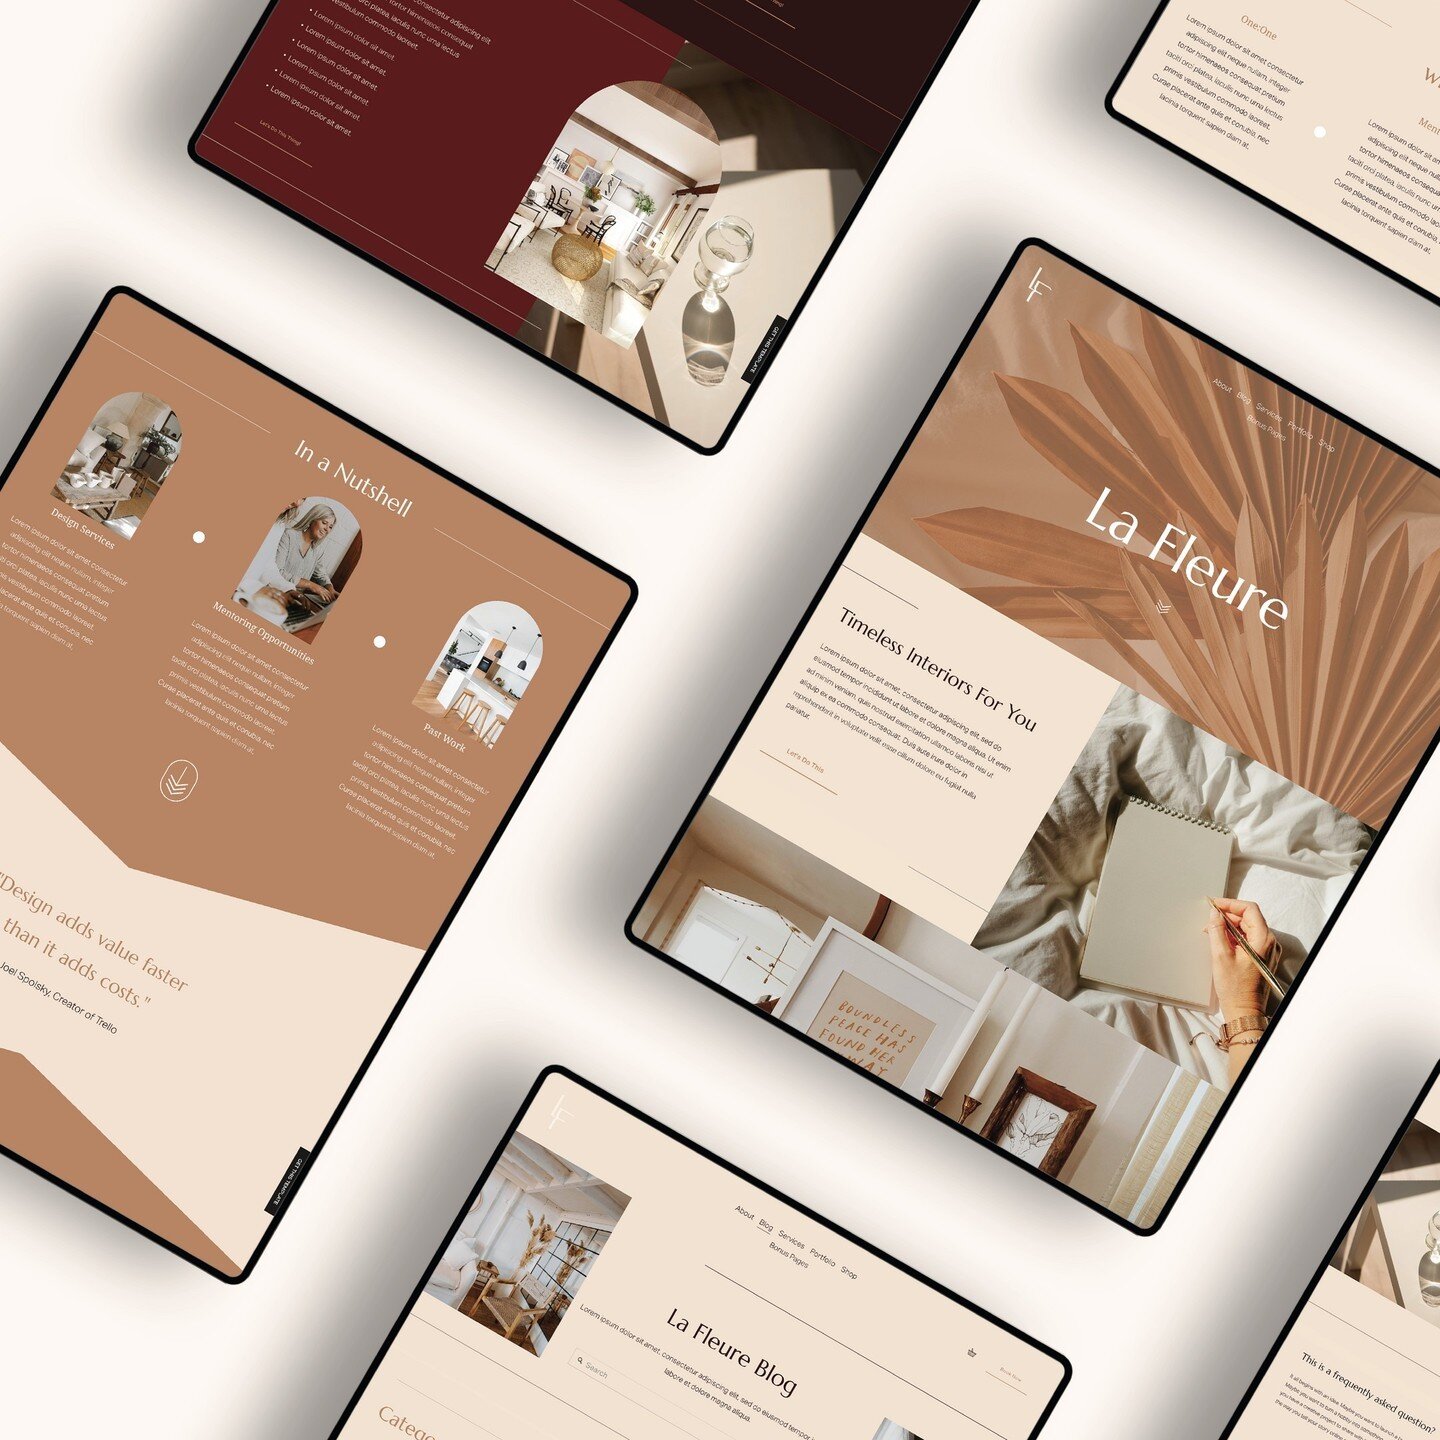 ✨ Welcome to La Fleure✨⁠
⁠
For creative services providers, entrepreneurs, freelancers and small businesses like interior design studios. Timeless, chic, and classic with a twist,  strategic and user-friendly, La Fleure has 14 pages that will help yo